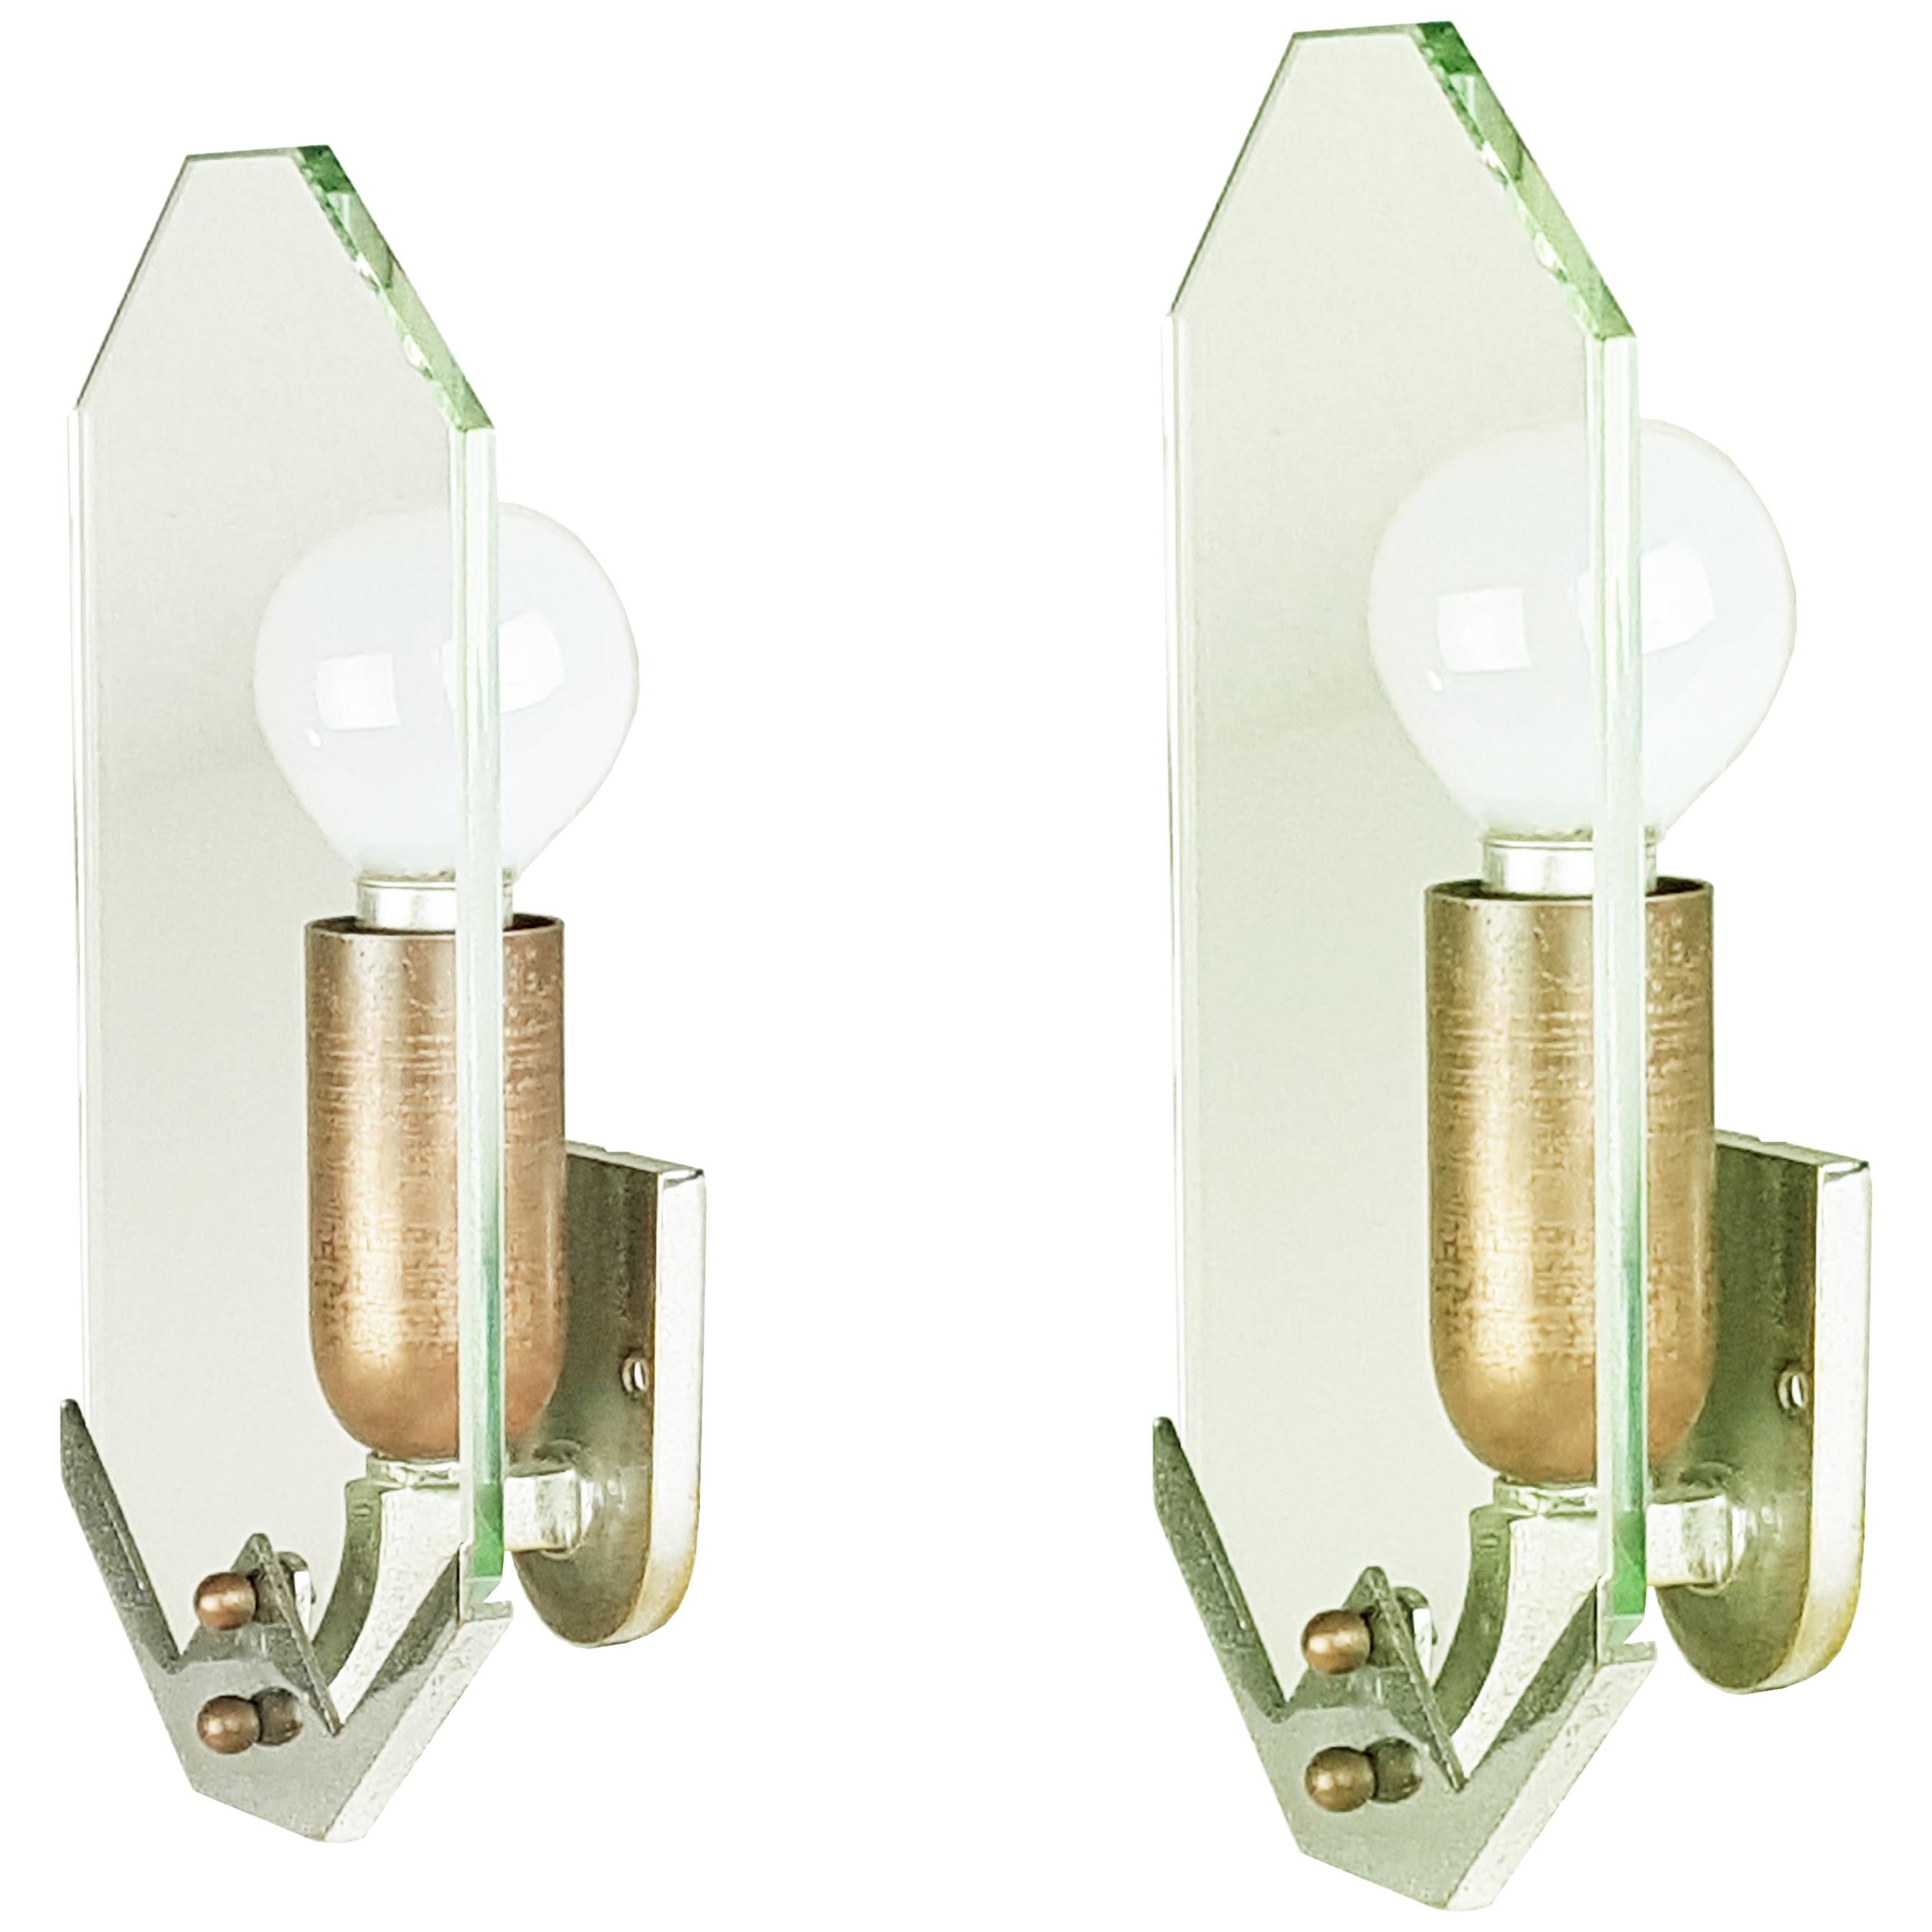 Pair of Small Cut Glass, Copper & Chrome-Plated Metal 1930s Deco Wall Lamps